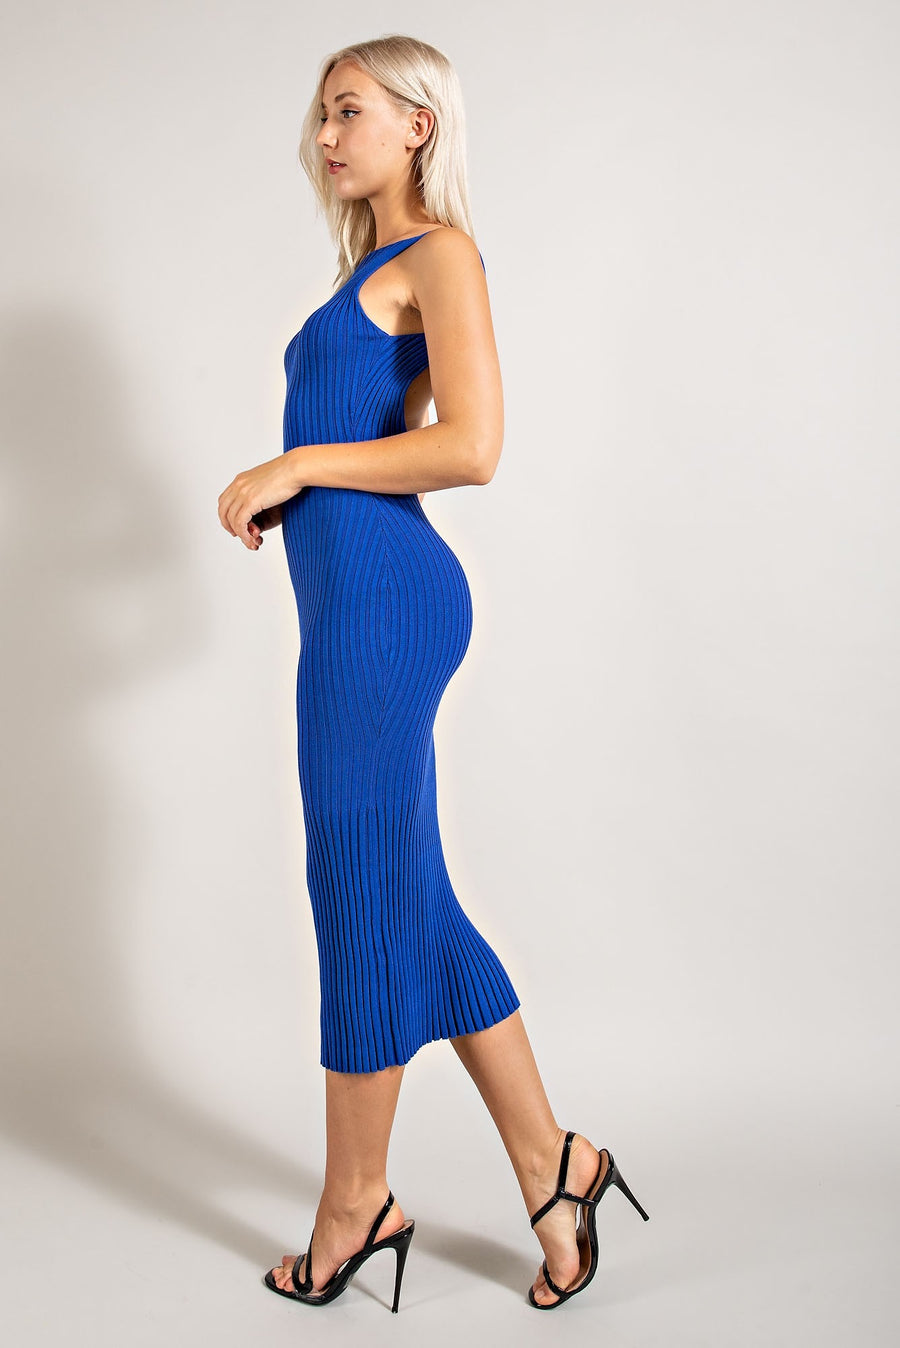 Midi short sleeve dress in the color royal blue.